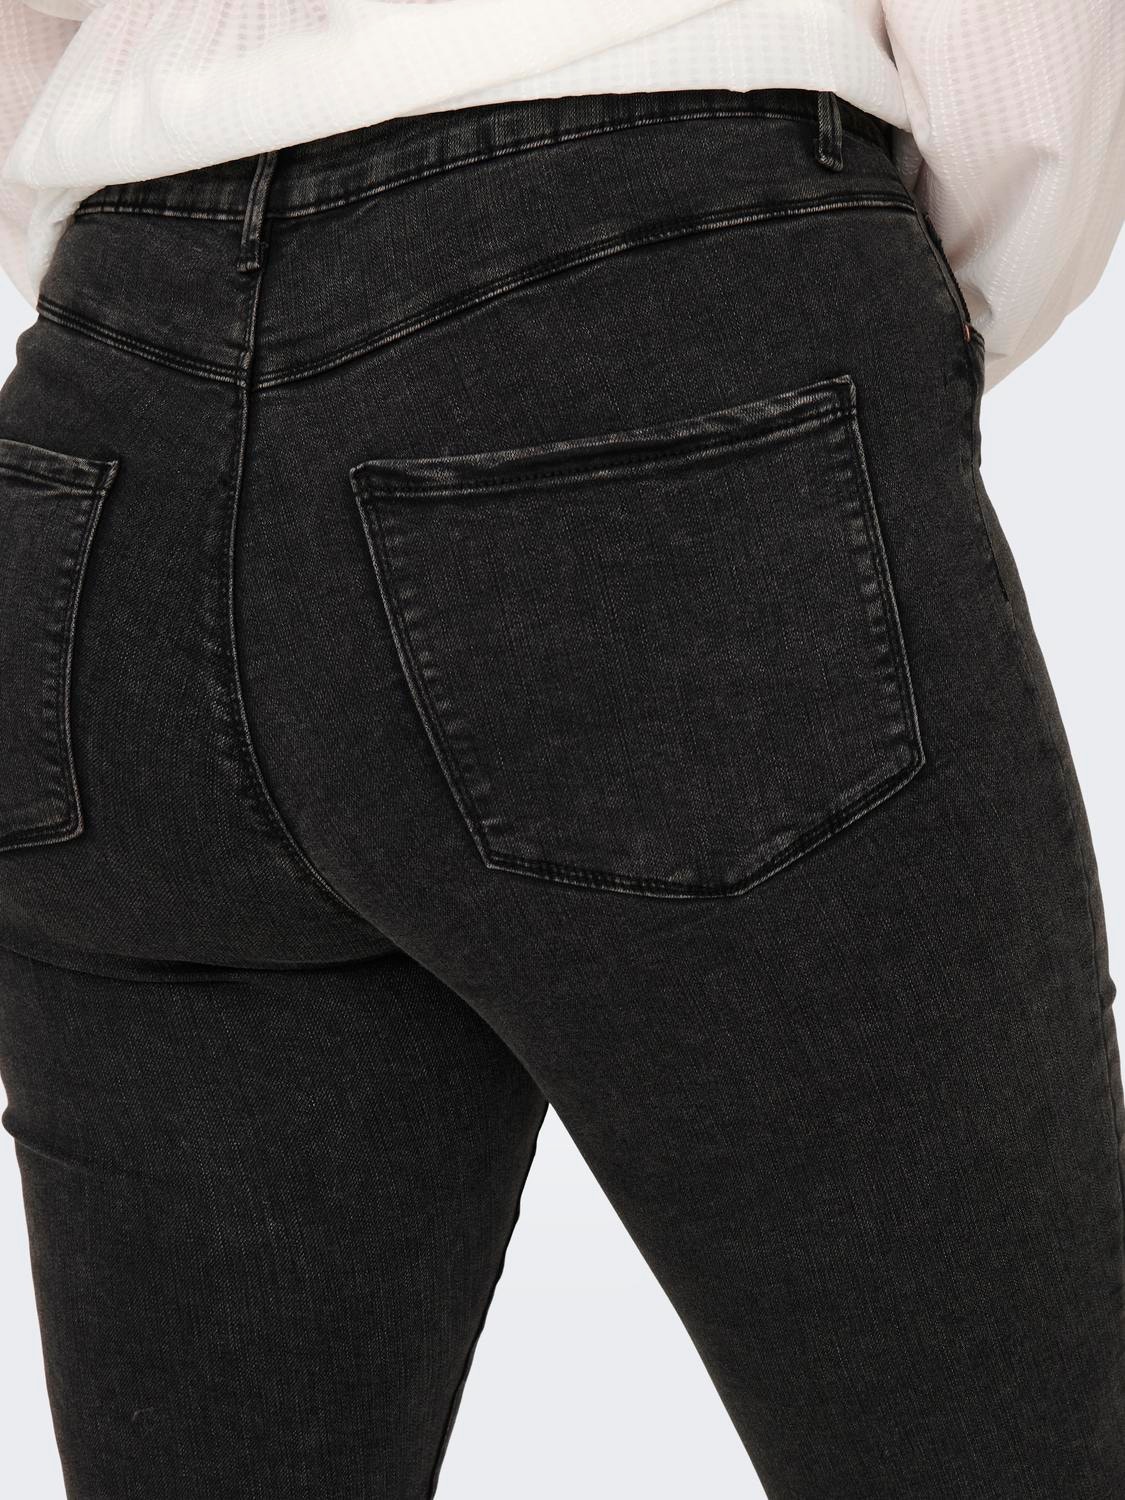 ONLY Jeans Skinny Fit Taille haute -Dark Grey Denim - 15300142